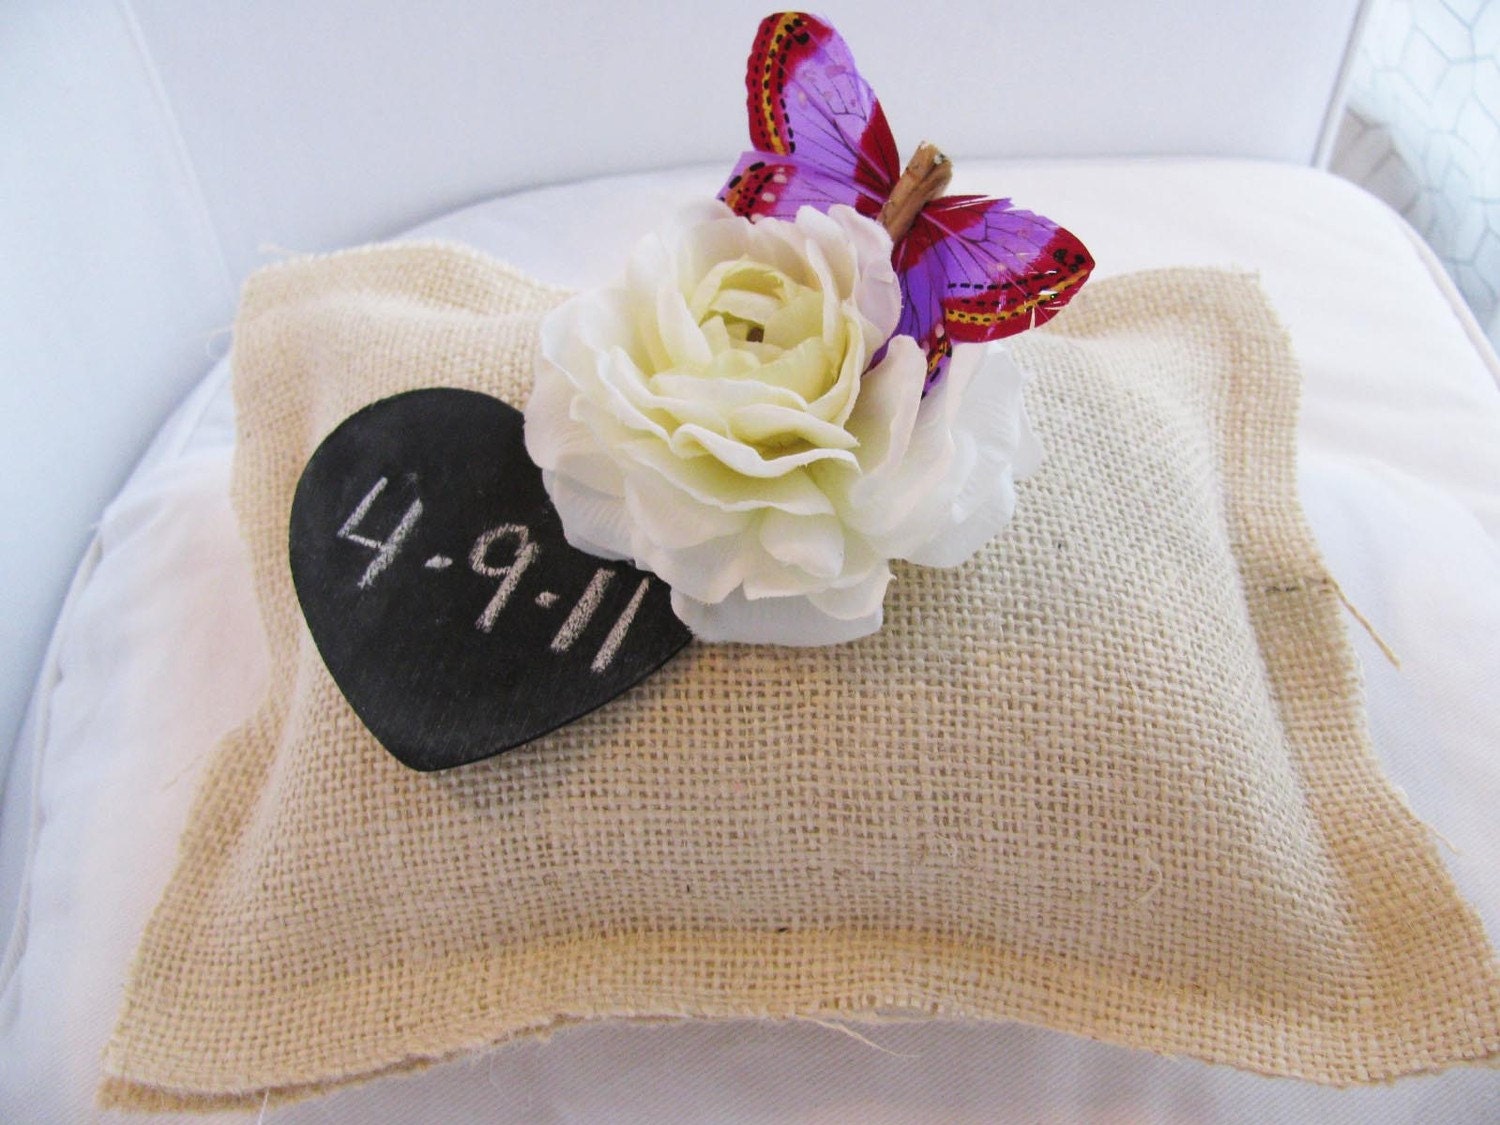 Woodland Outdoor Butterfly Rustic Burlap Wedding Ring Bearer Pillow Personalized Heart Chalkboard Tag You Customize Flowers